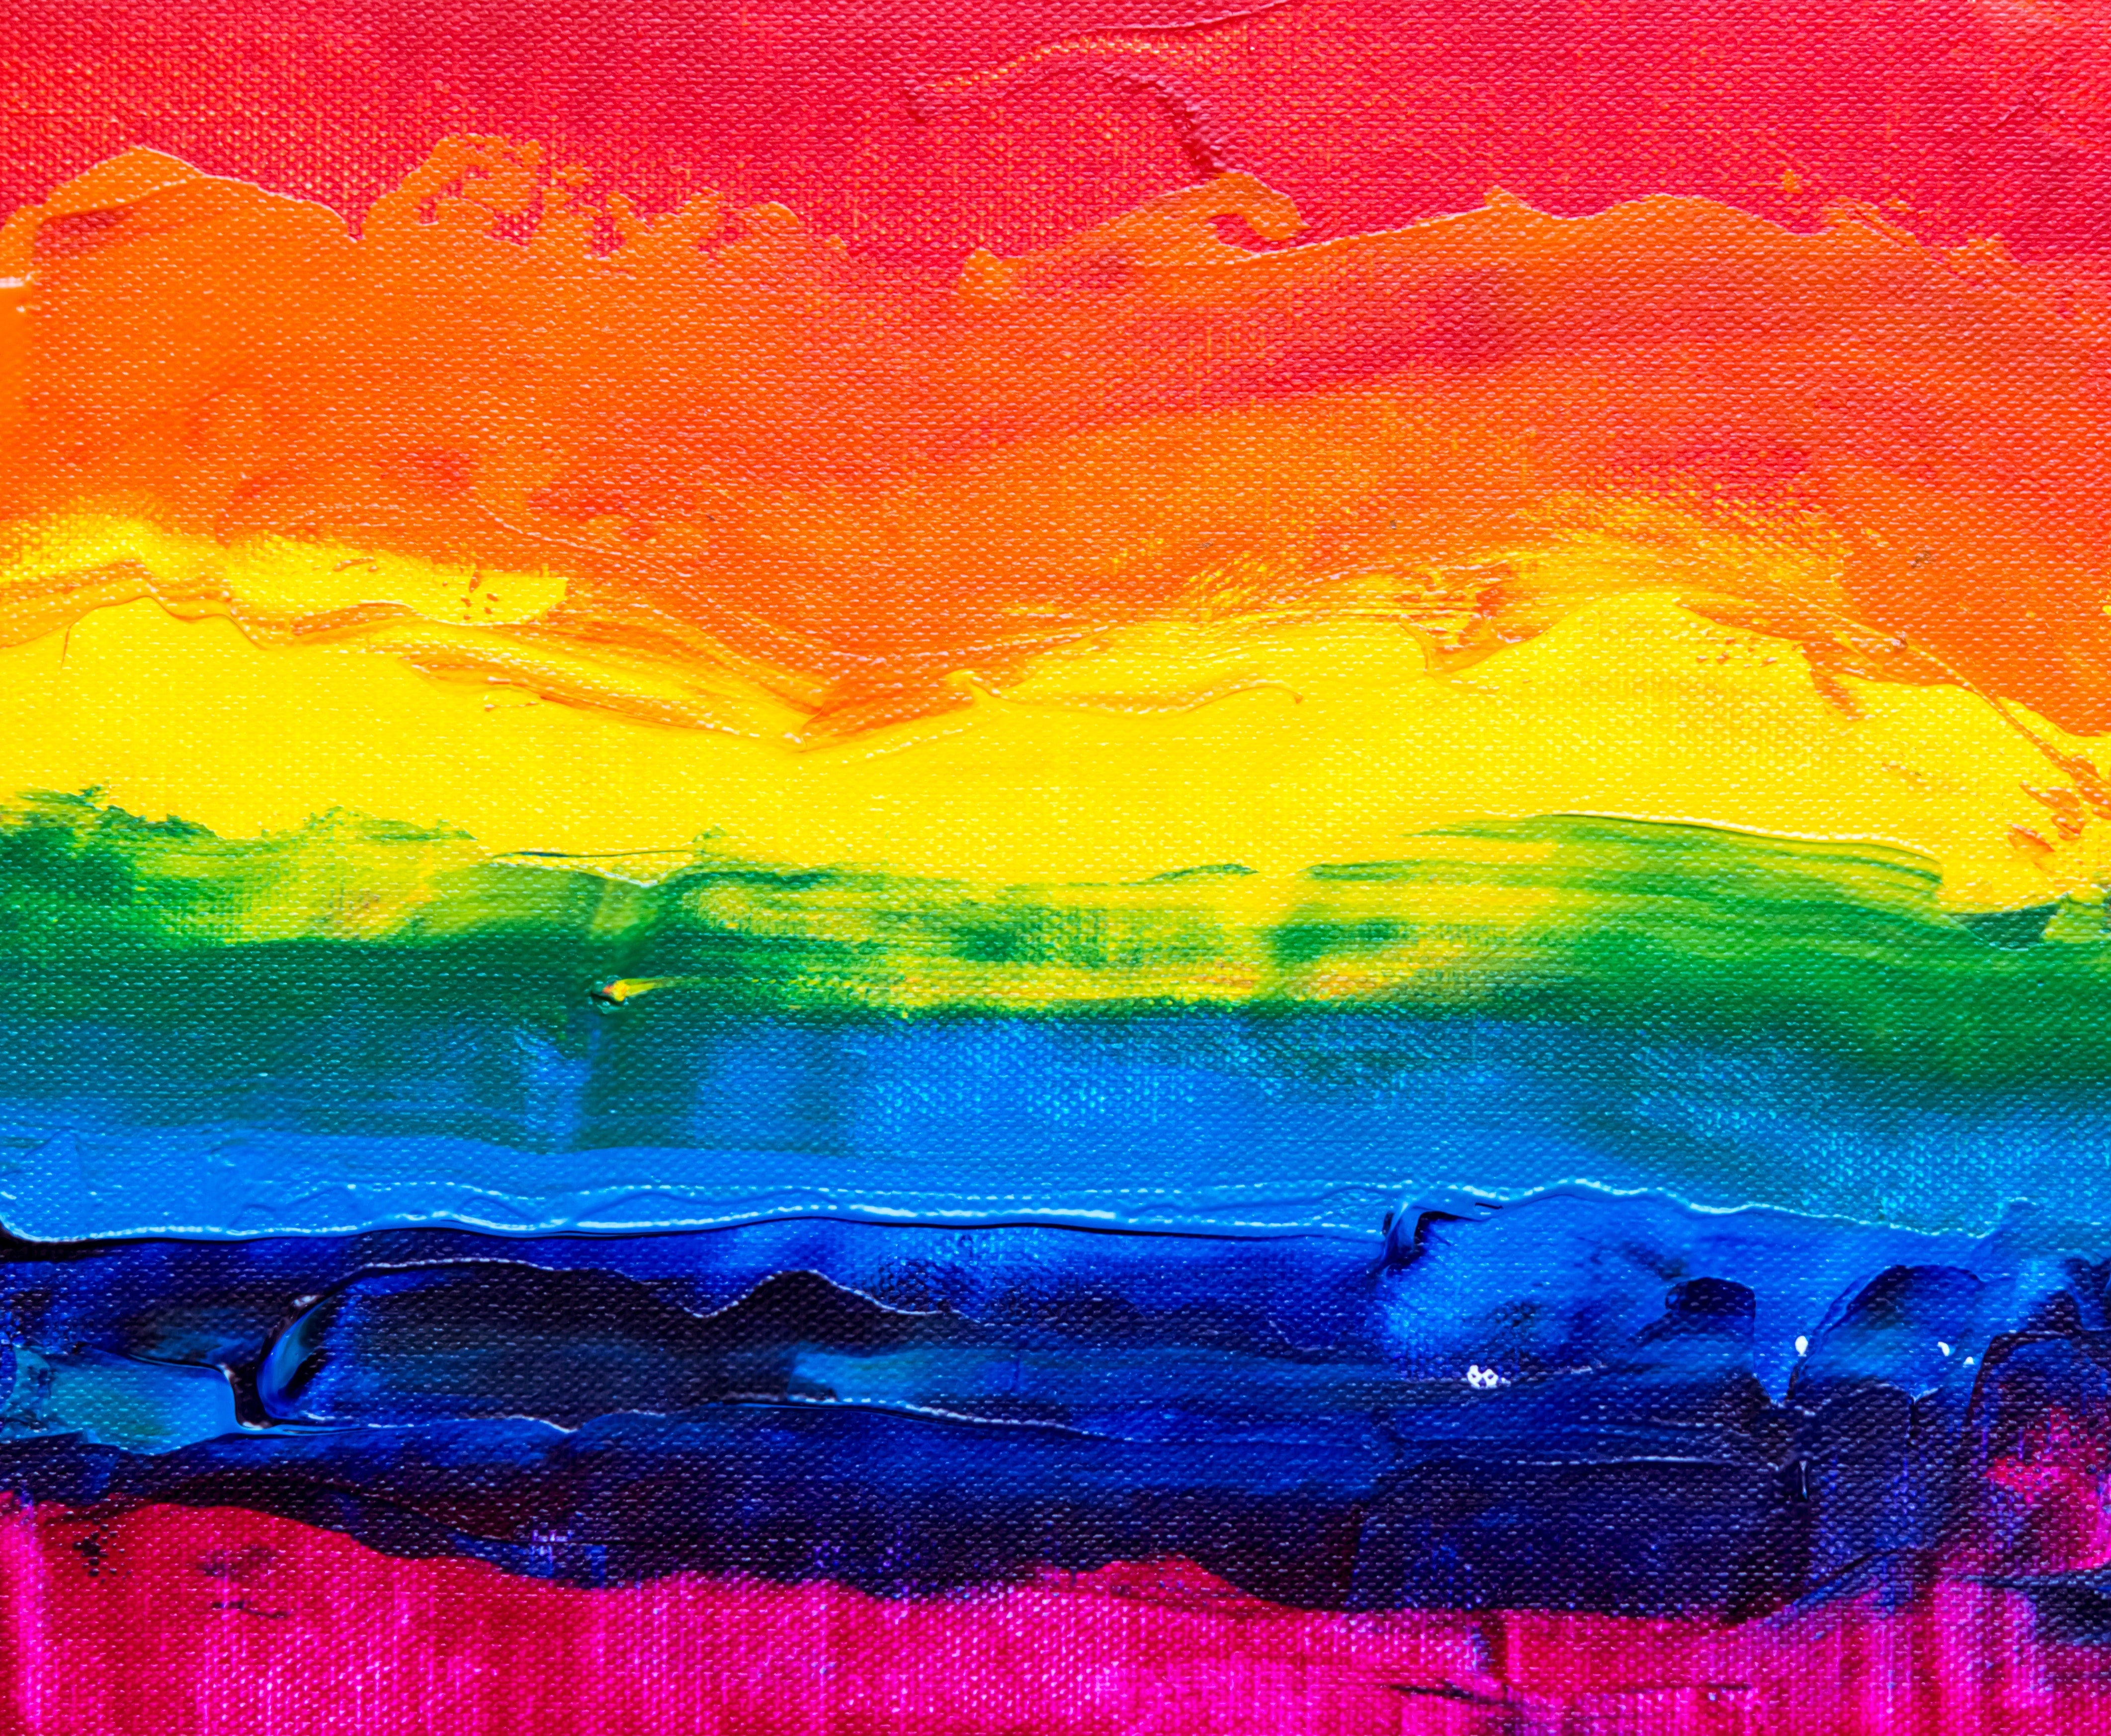 A painting of rainbow colors, from red to purple